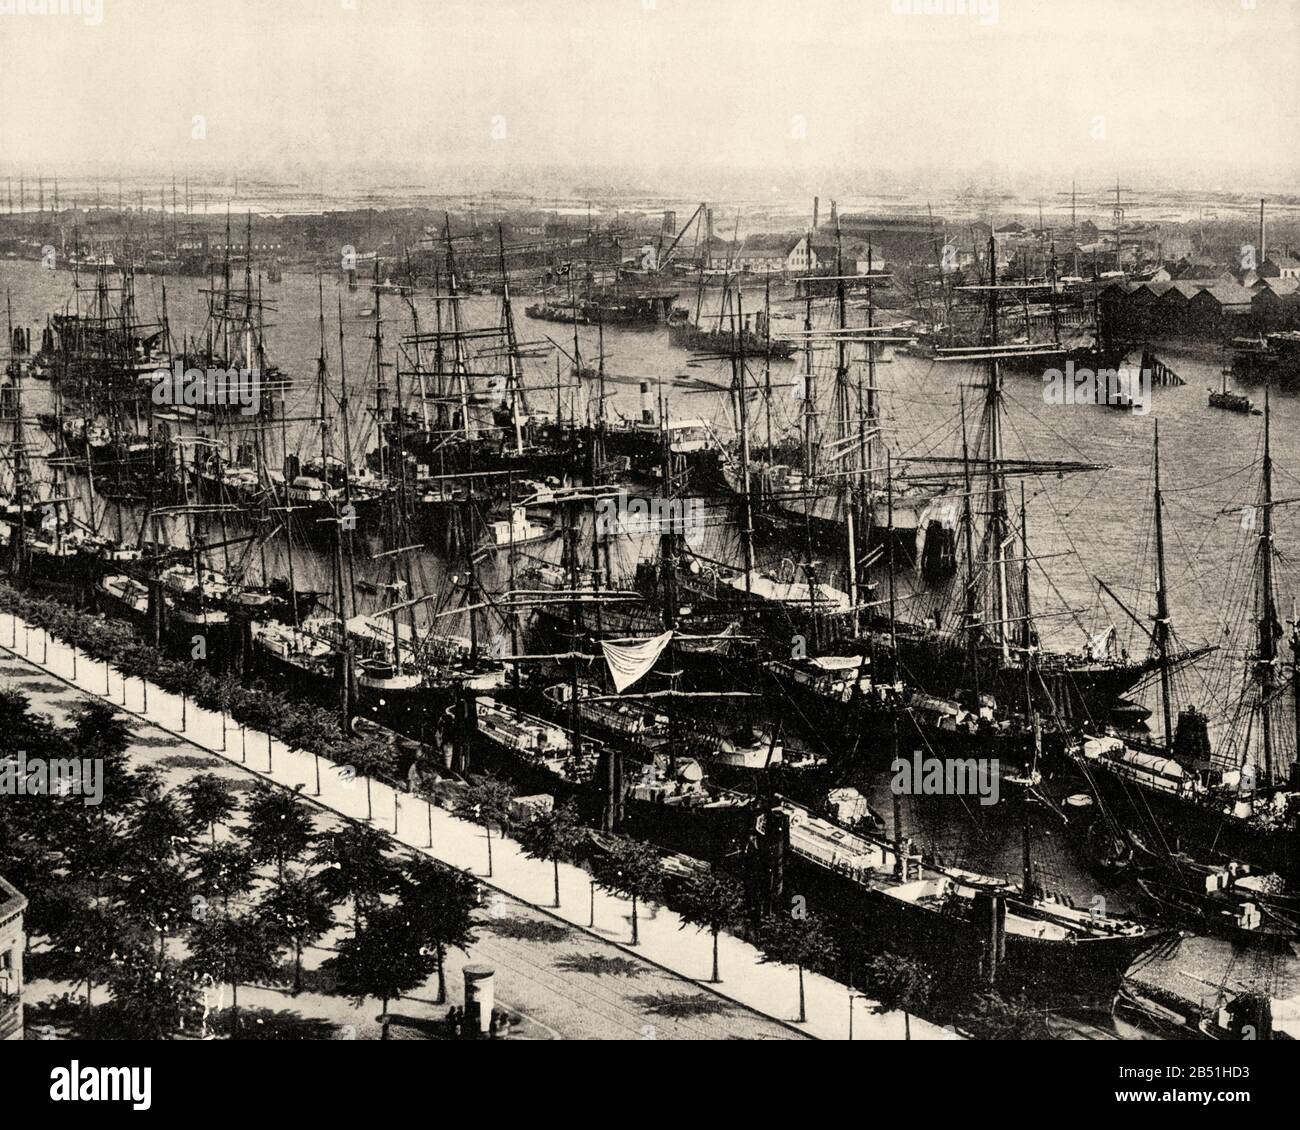 Hamburg harbour, Germany Europe. Old photograph late 19th century from  Portfolio of Photographs by John L Stoddard 1899 Stock Photo - Alamy